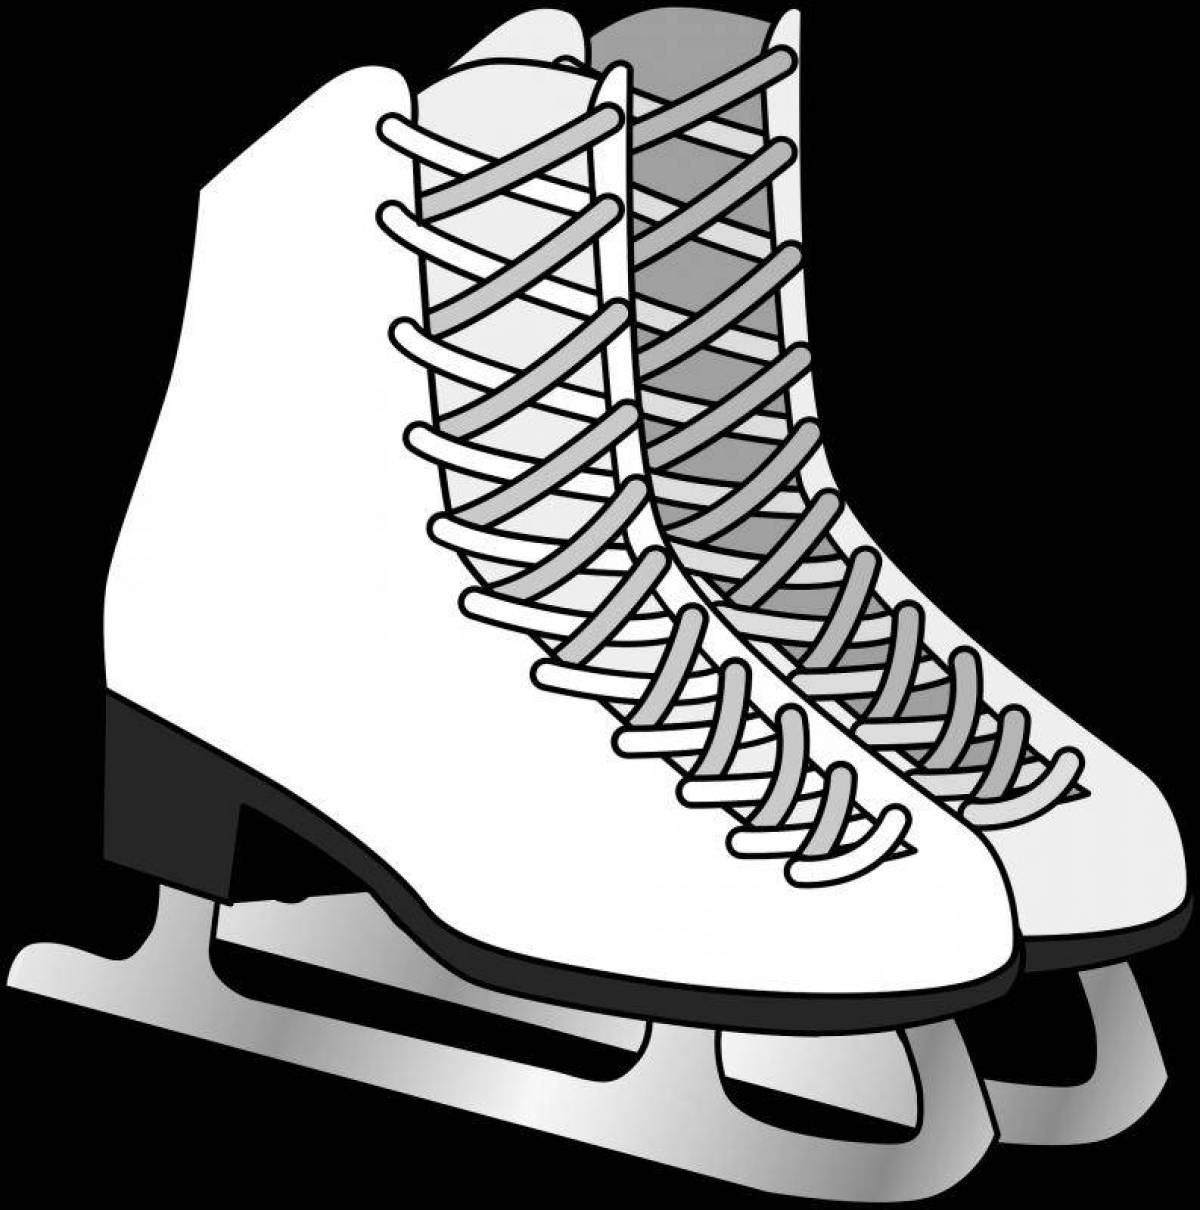 Cute figure skates coloring page